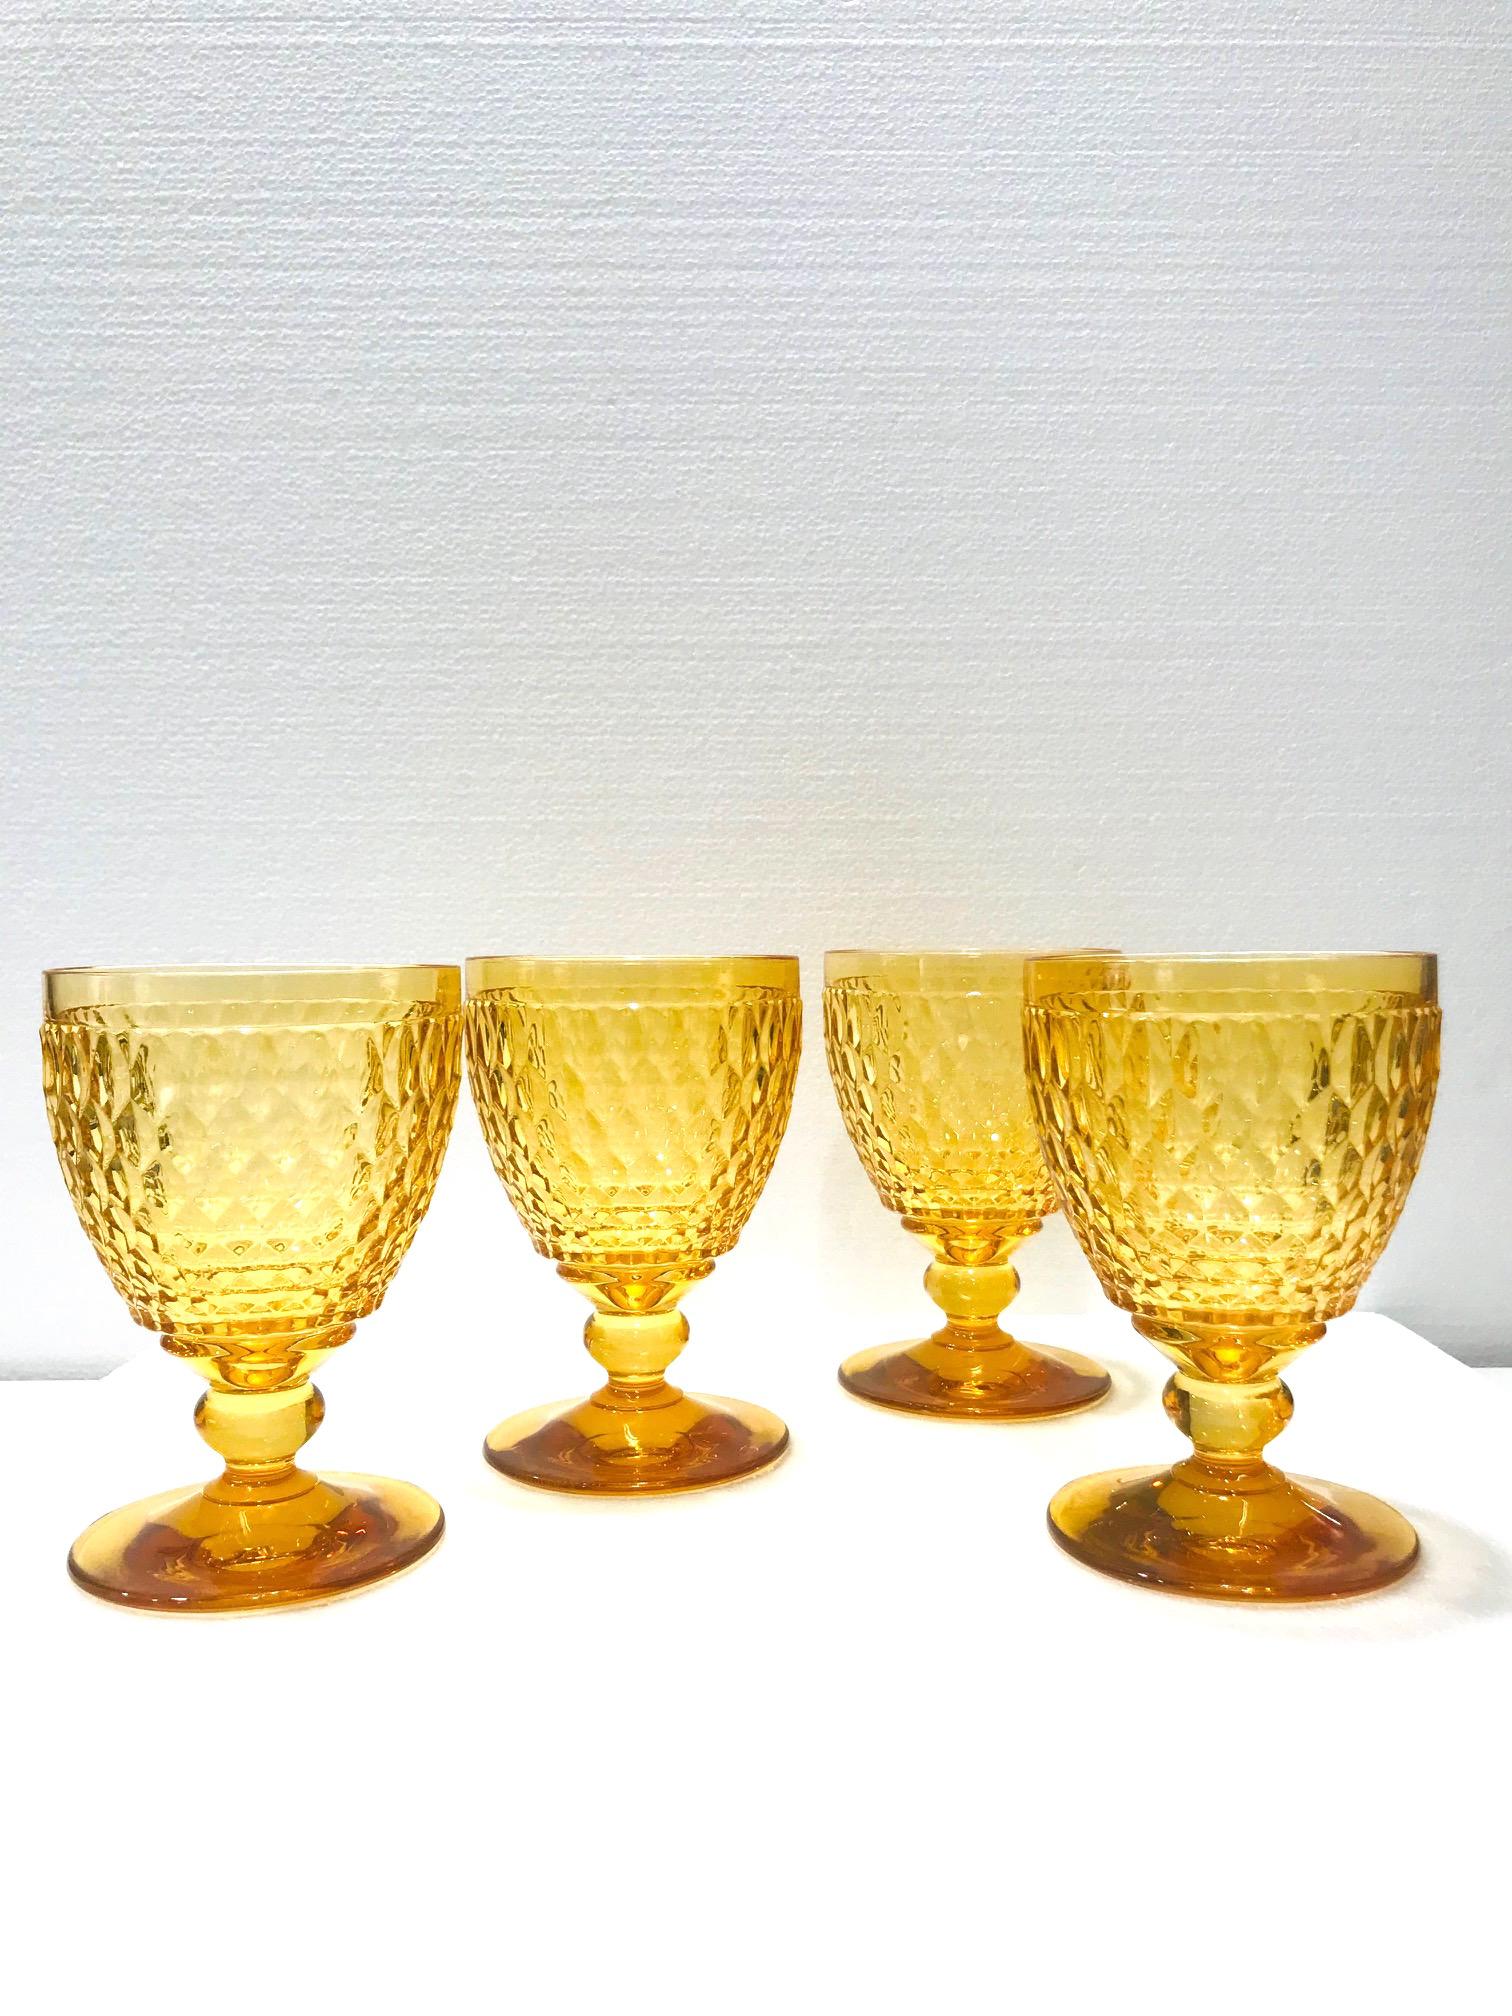 Hollywood Regency Set of Eight Villeroy & Boch Crystal Water Goblets in Amber Yellow, circa 2000